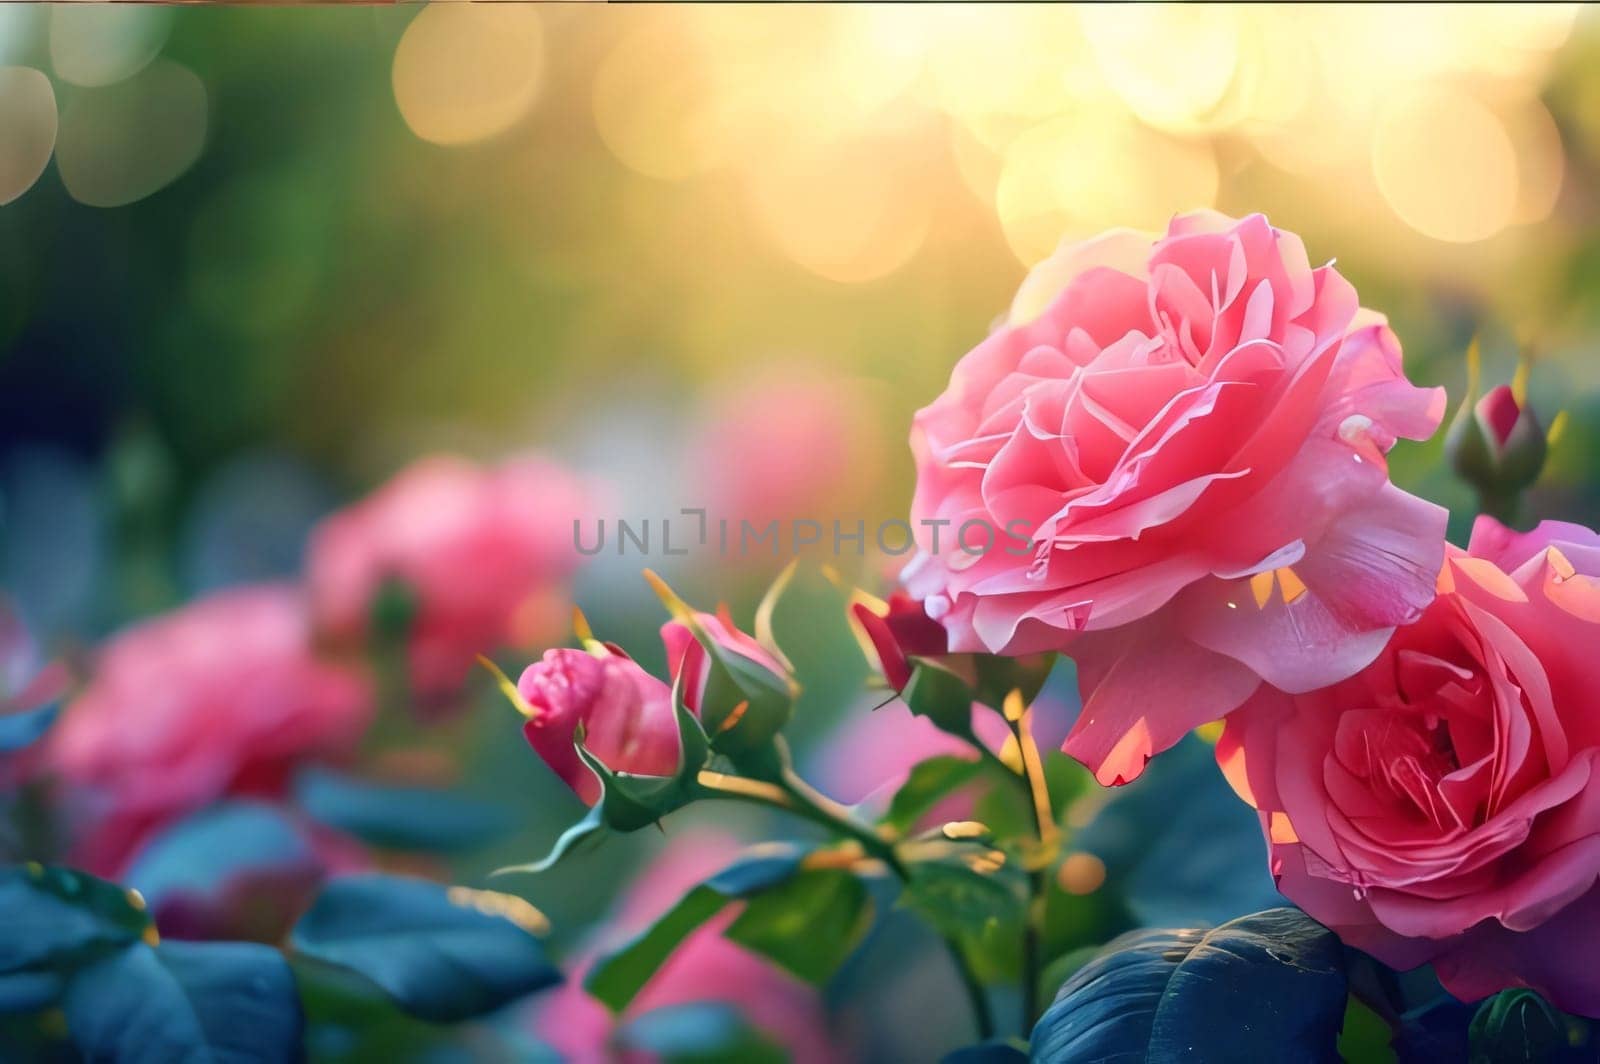 Pink roses on a light smudged background, banner with space for your own content. Flowering flowers, a symbol of spring, new life. A joyful time of nature waking up to life.